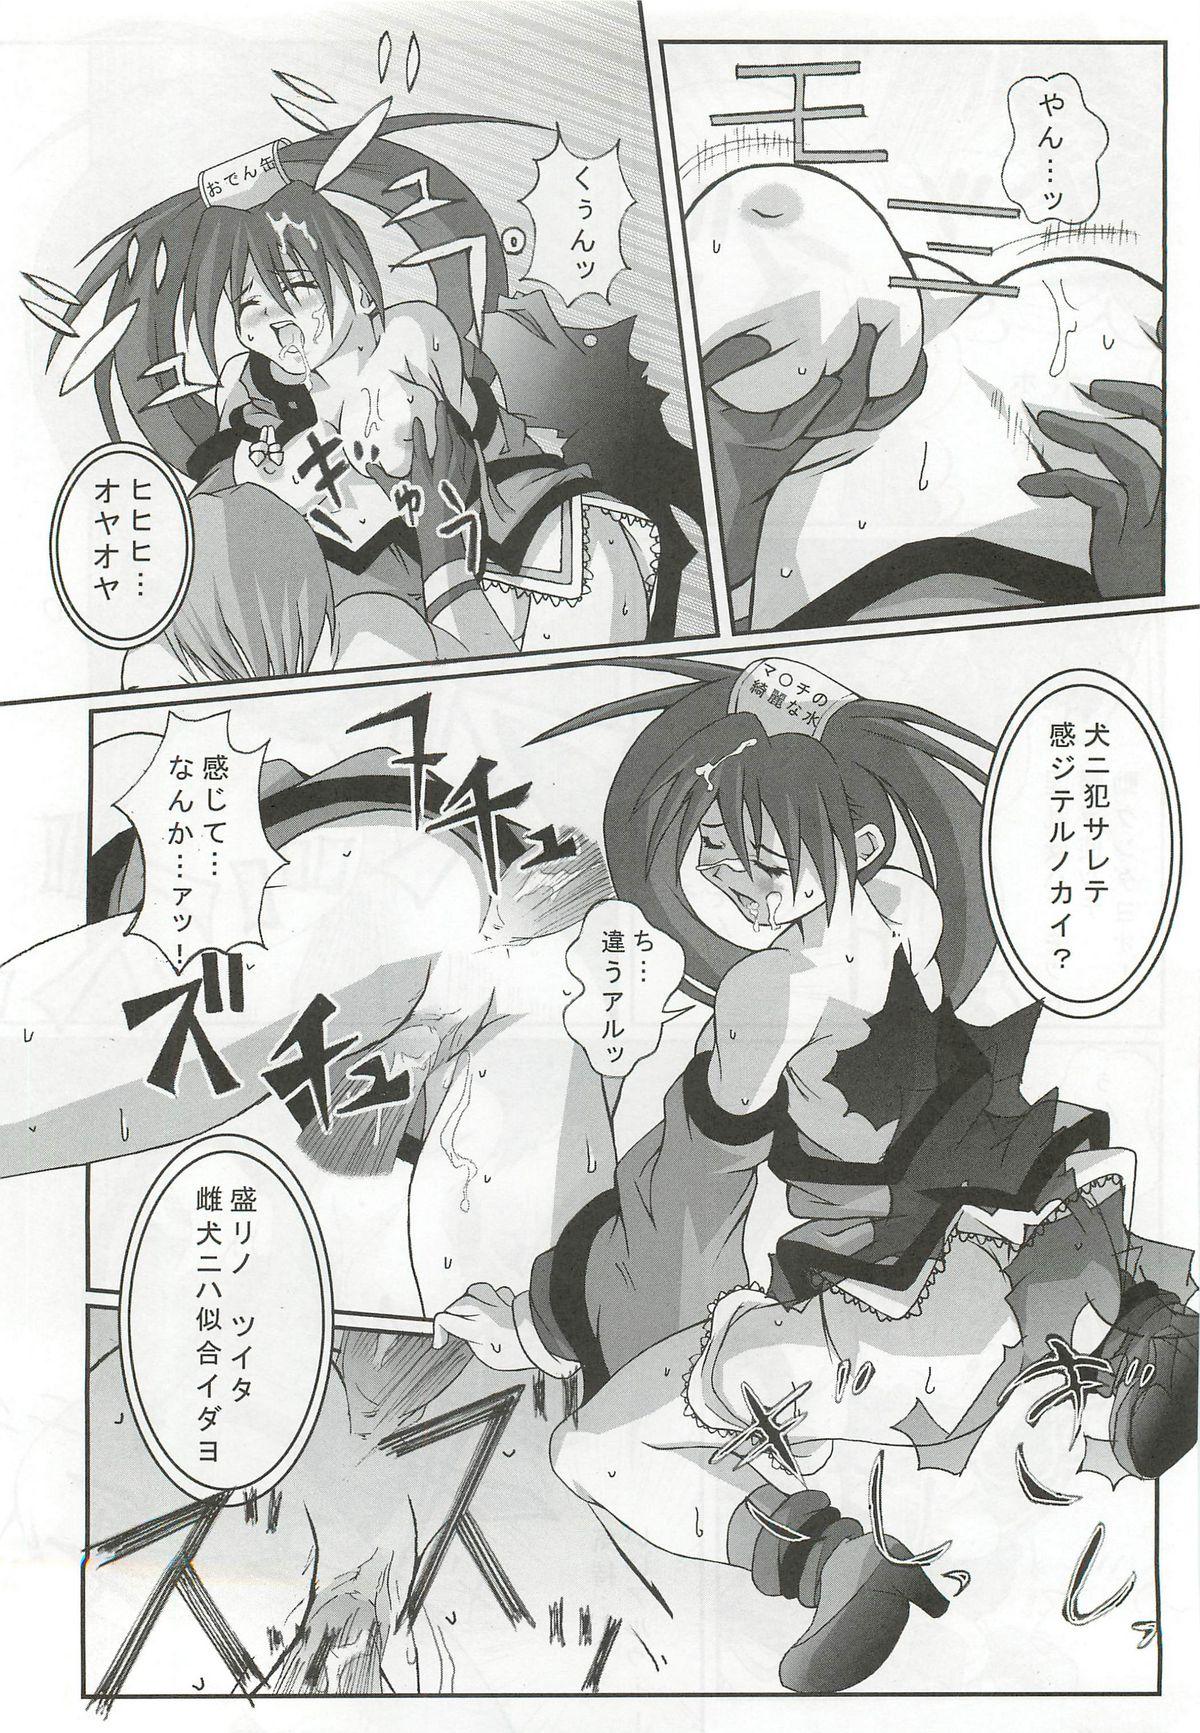 Indonesia Passionless 2 - Guilty gear Mas - Page 11